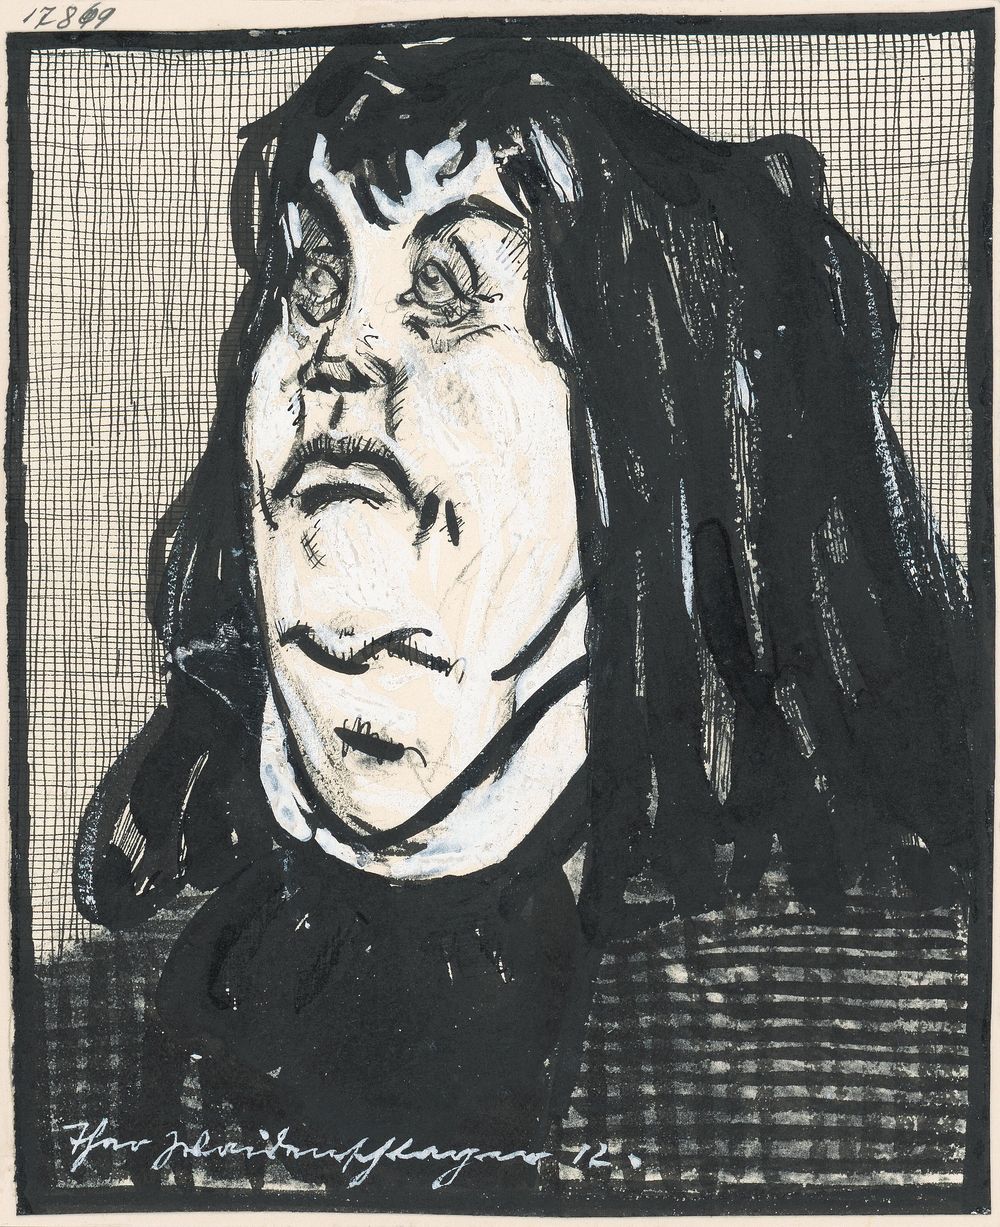 Caricature of a man with long hair, Theo Waidenschlager